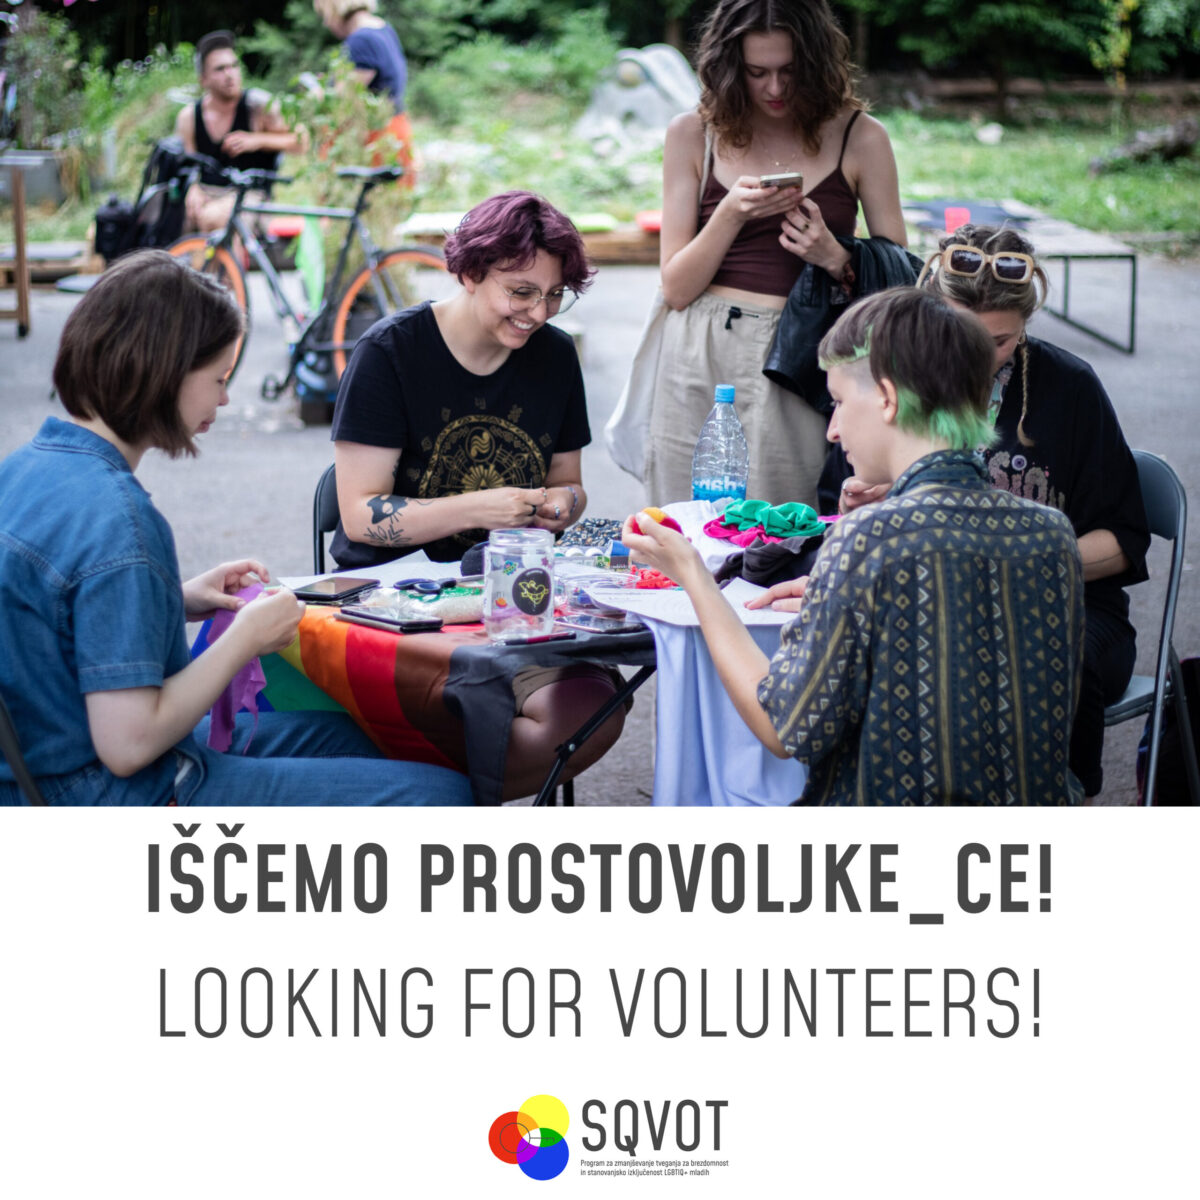 The SQVOT programme is looking for volunteers!